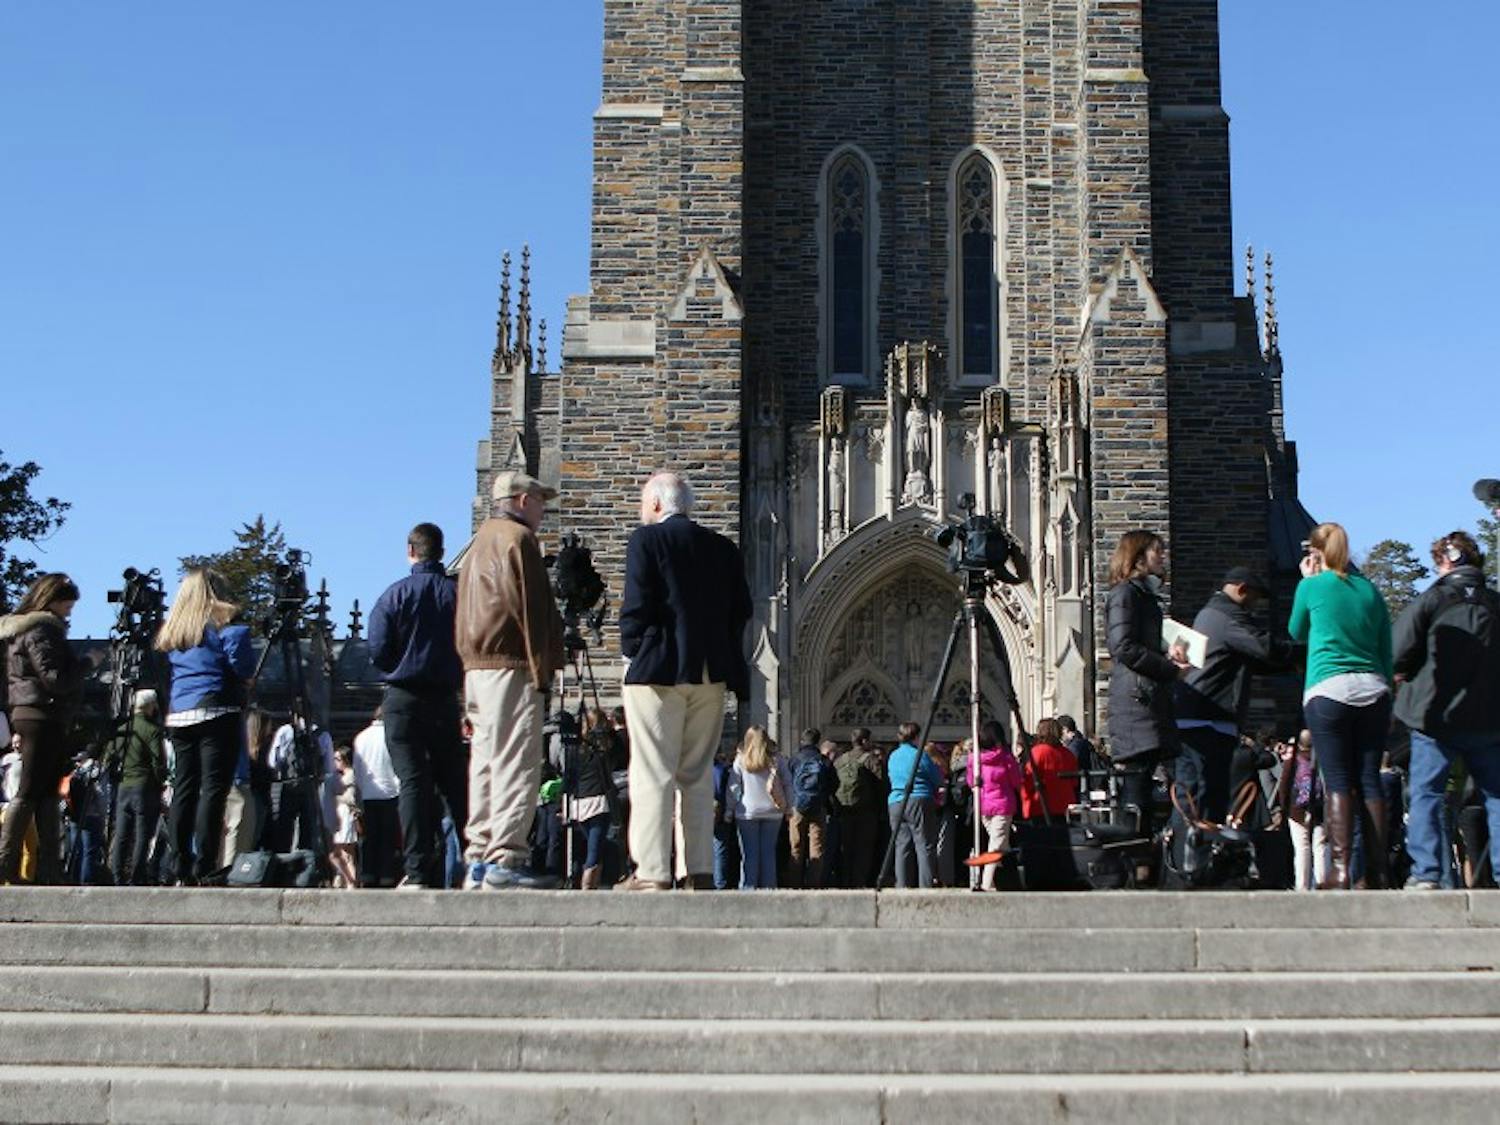 After a whirlwind of hotly-contested debate, Duke administrators made the decision to move adhan from the Duke Chapel bell tower.